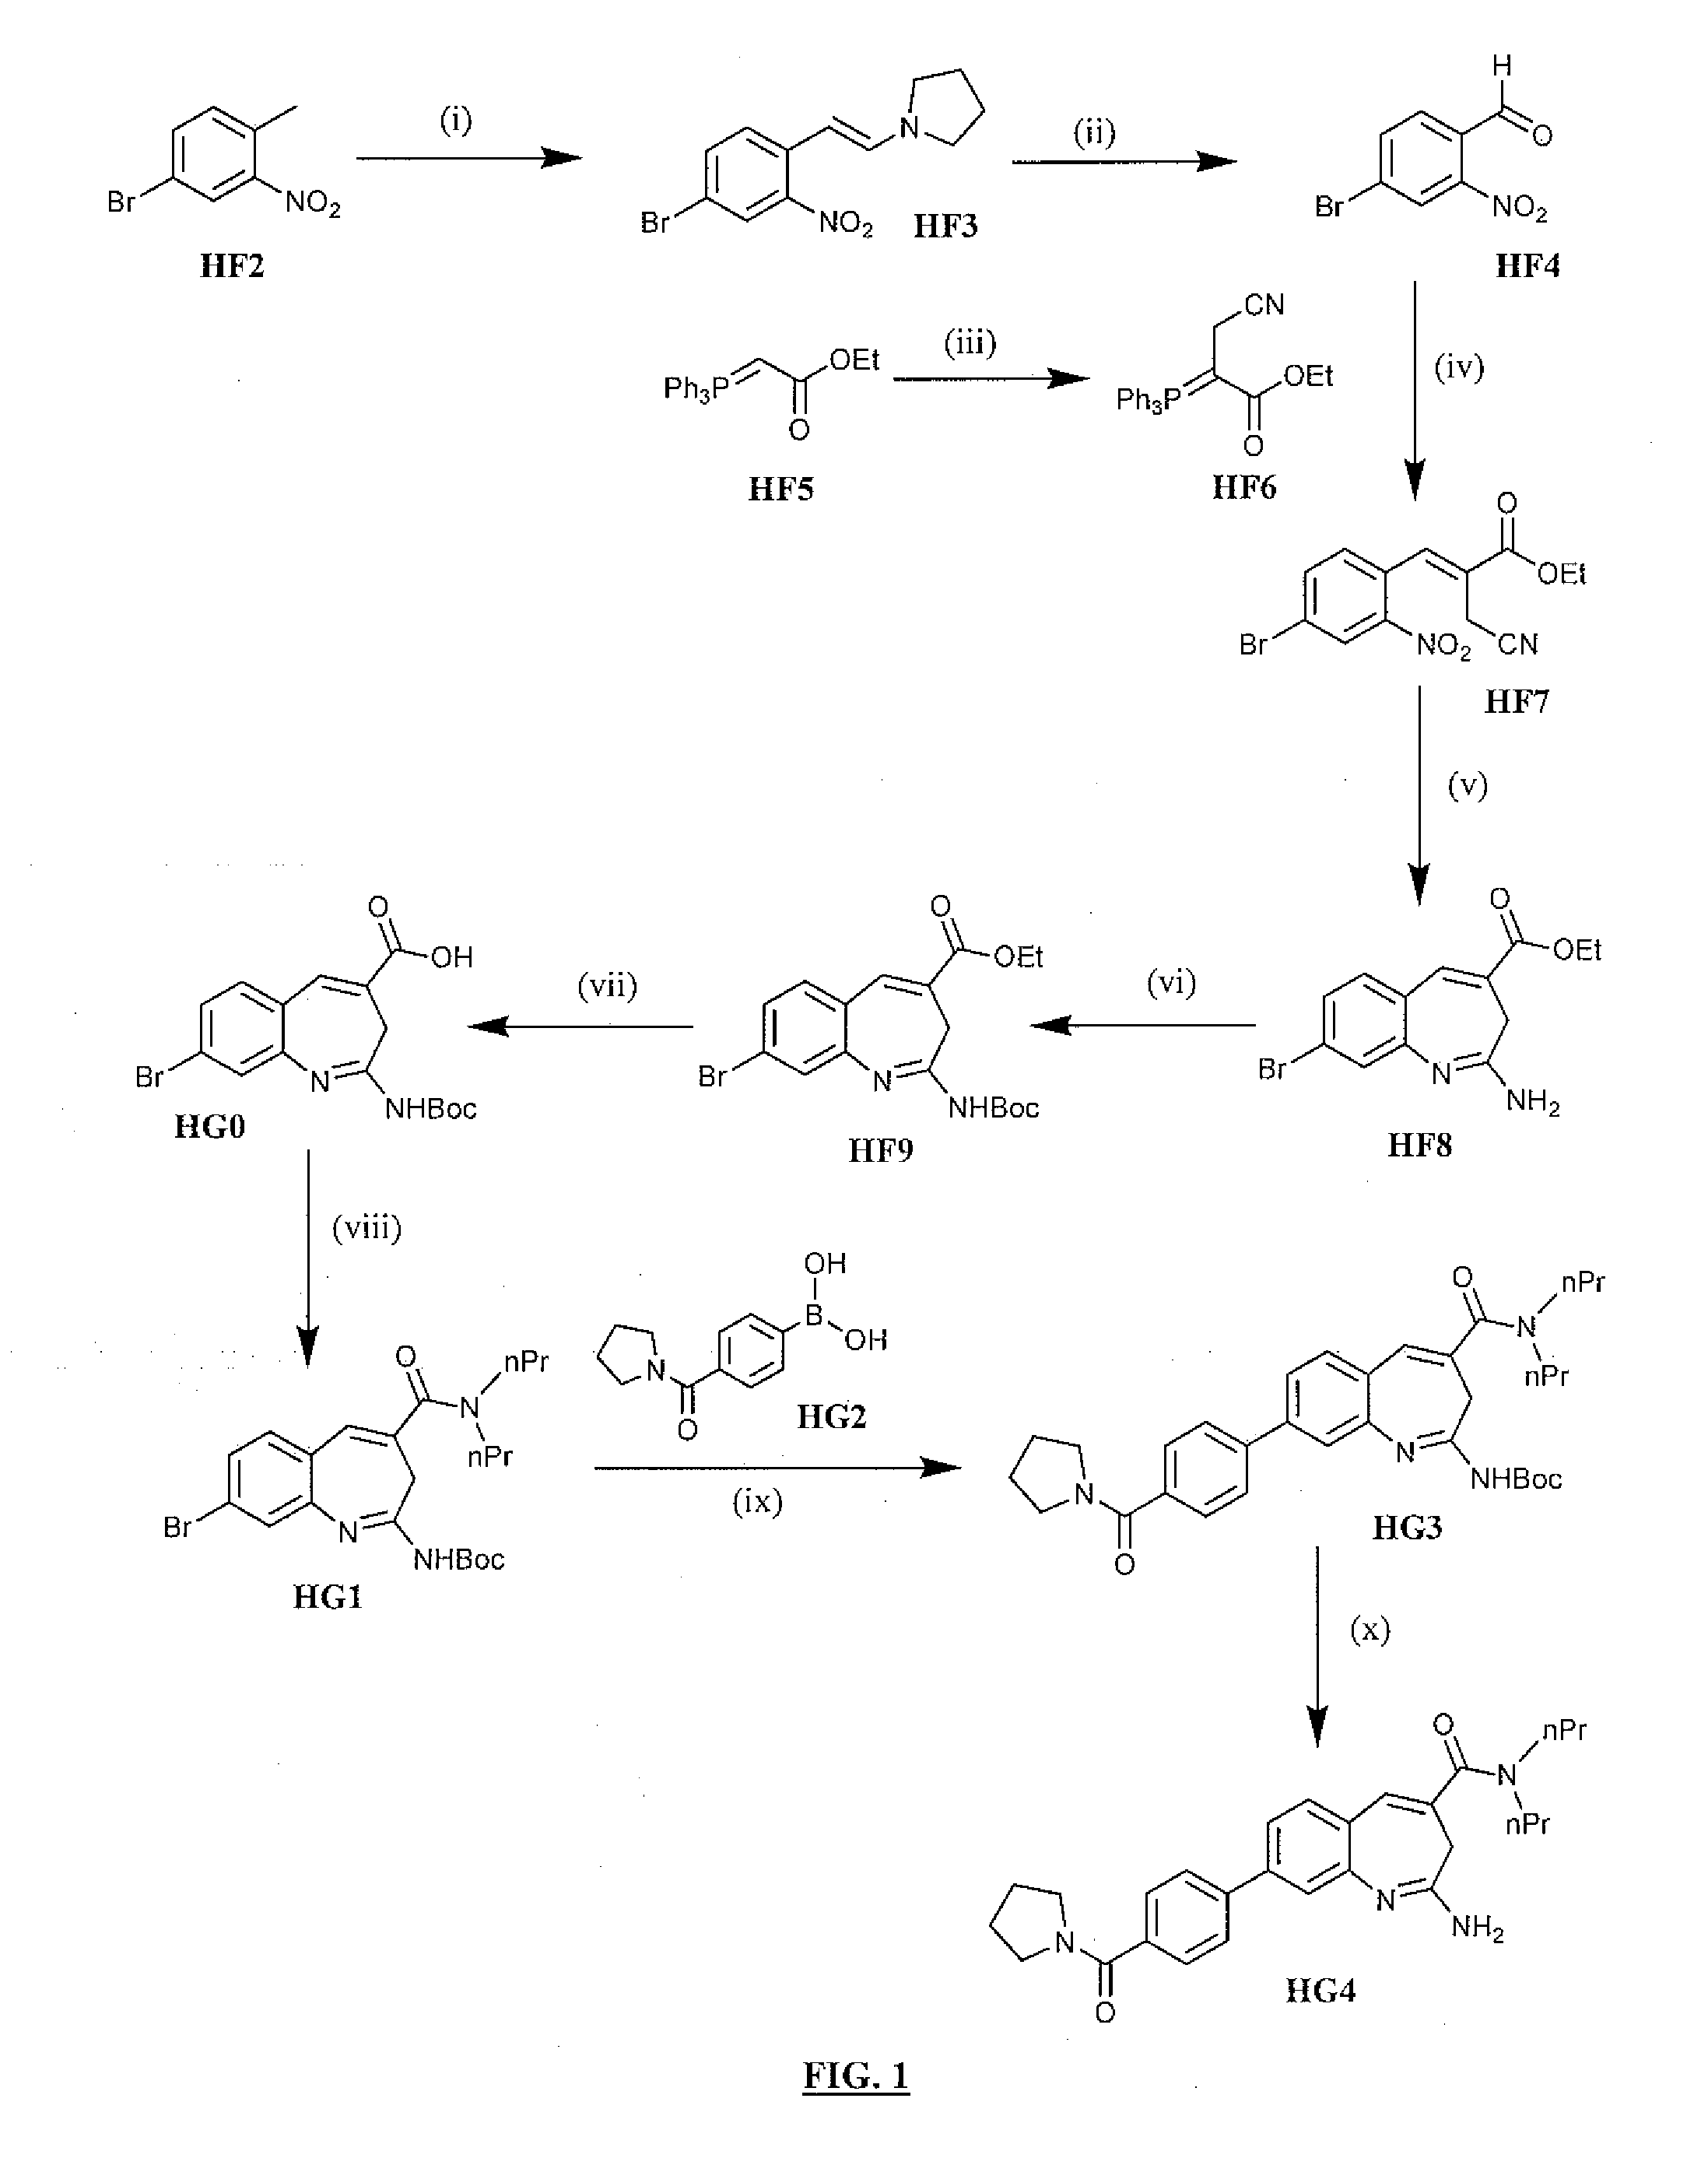 Methods of synthesis of benzazepine derivatives